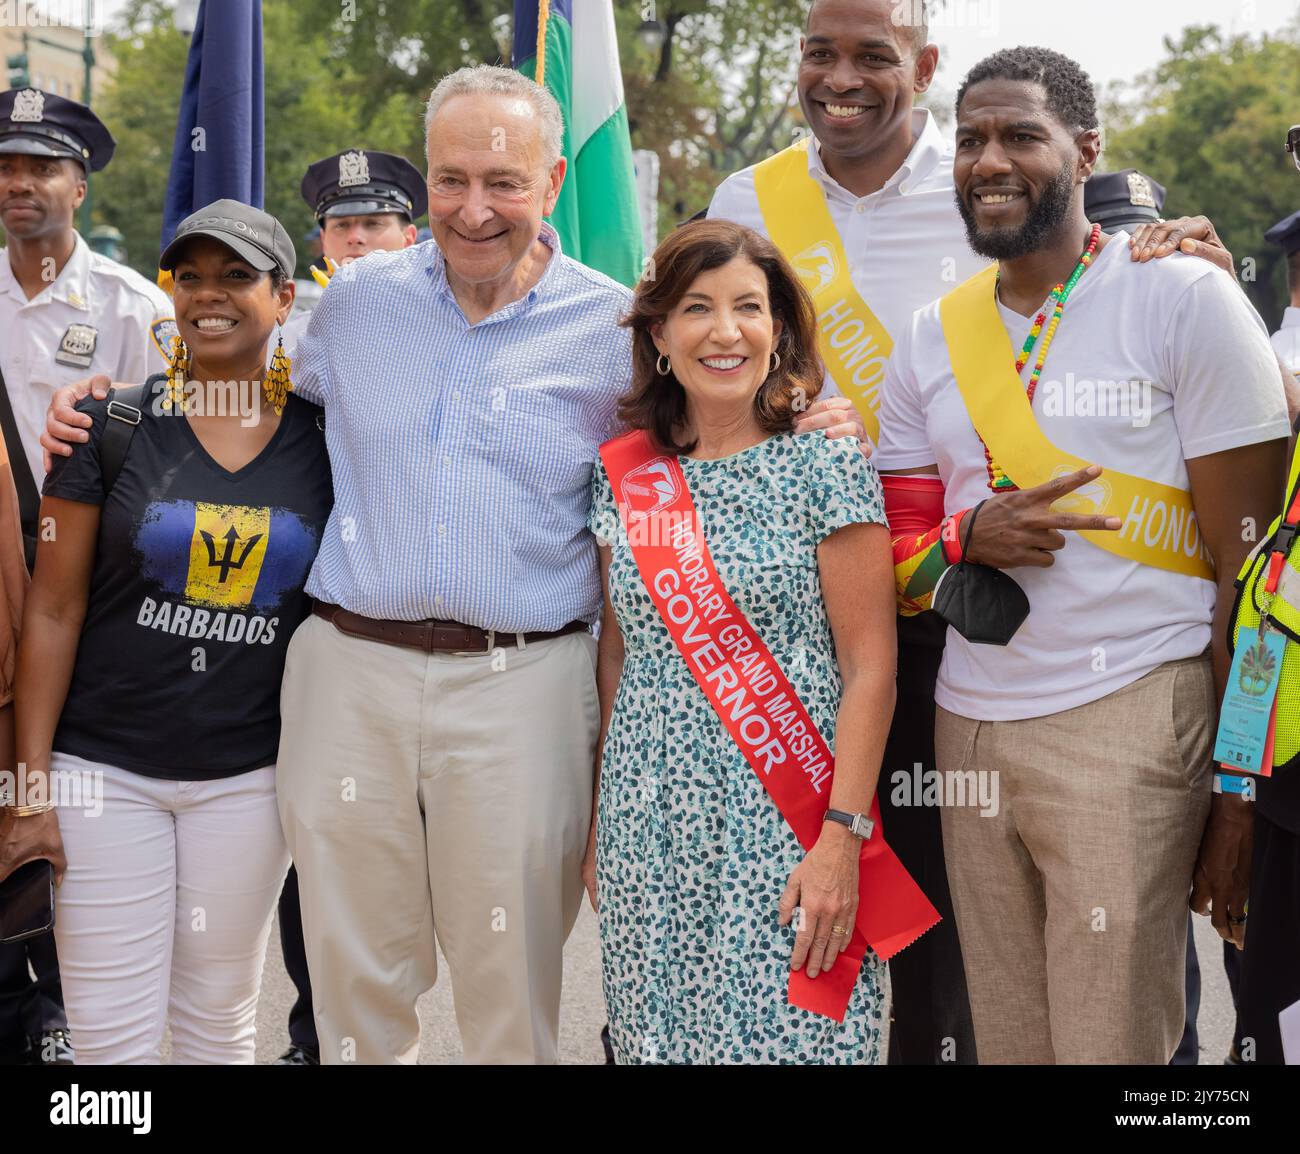 BROOKLYN, N.Y. – September 5, 2022: Senator Chuck Schumer, Governor Kathy Hochul, and other dignitaries are seen at the West Indian Day Parade. Stock Photo